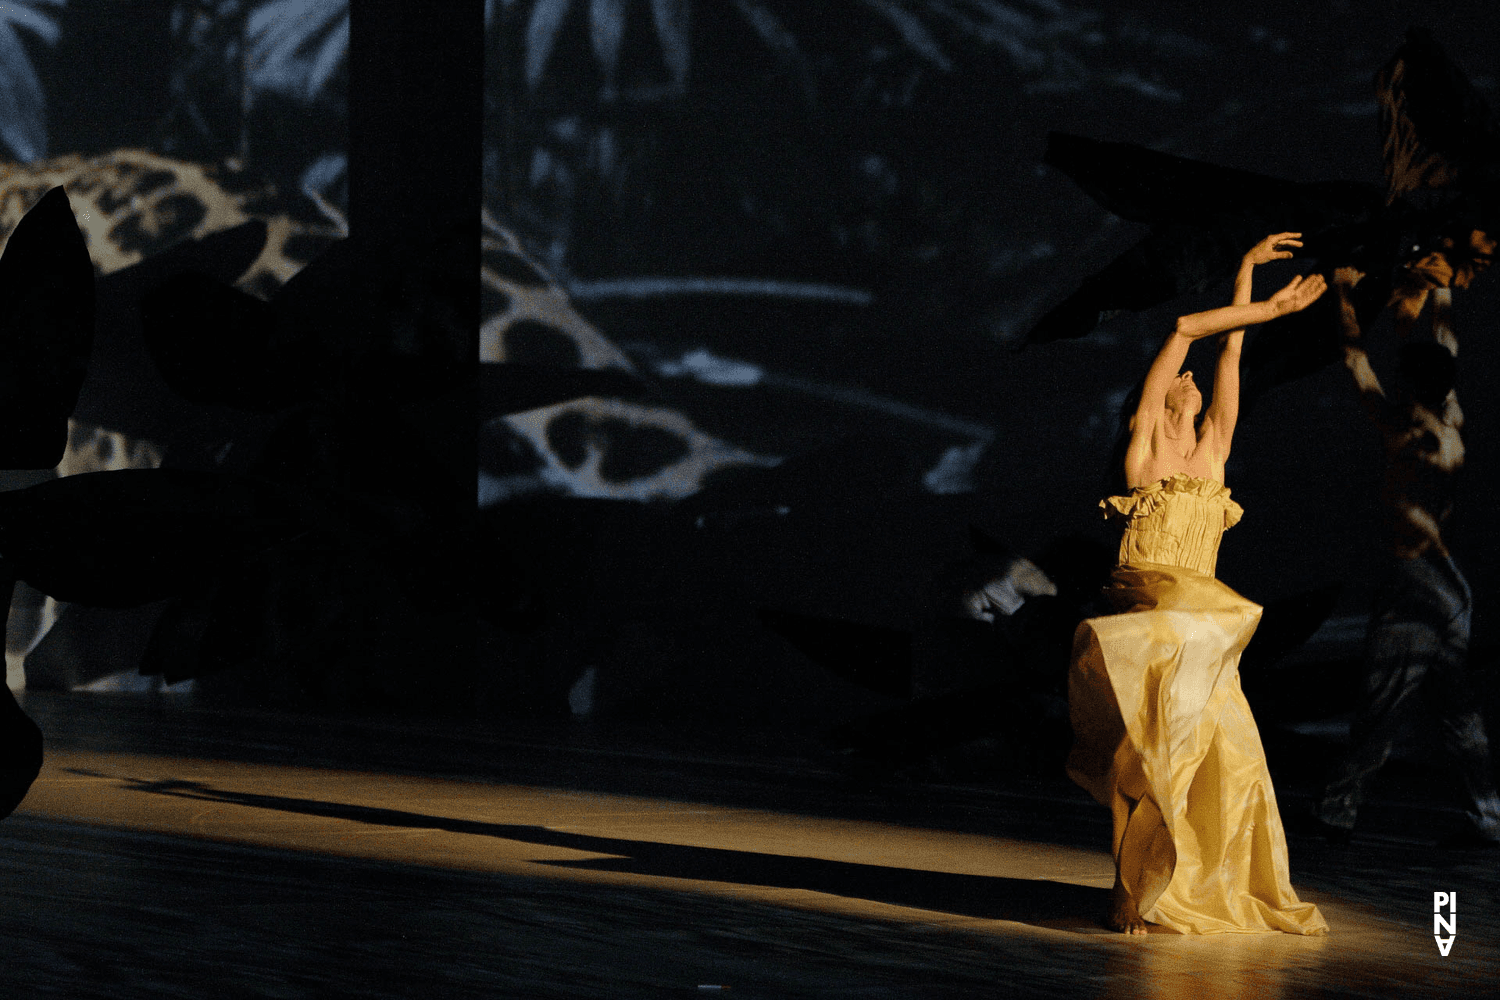 “Água” by Pina Bausch with Tanztheater Wuppertal at Teatro La Fenice Venedig (Italy), July 11, 2007